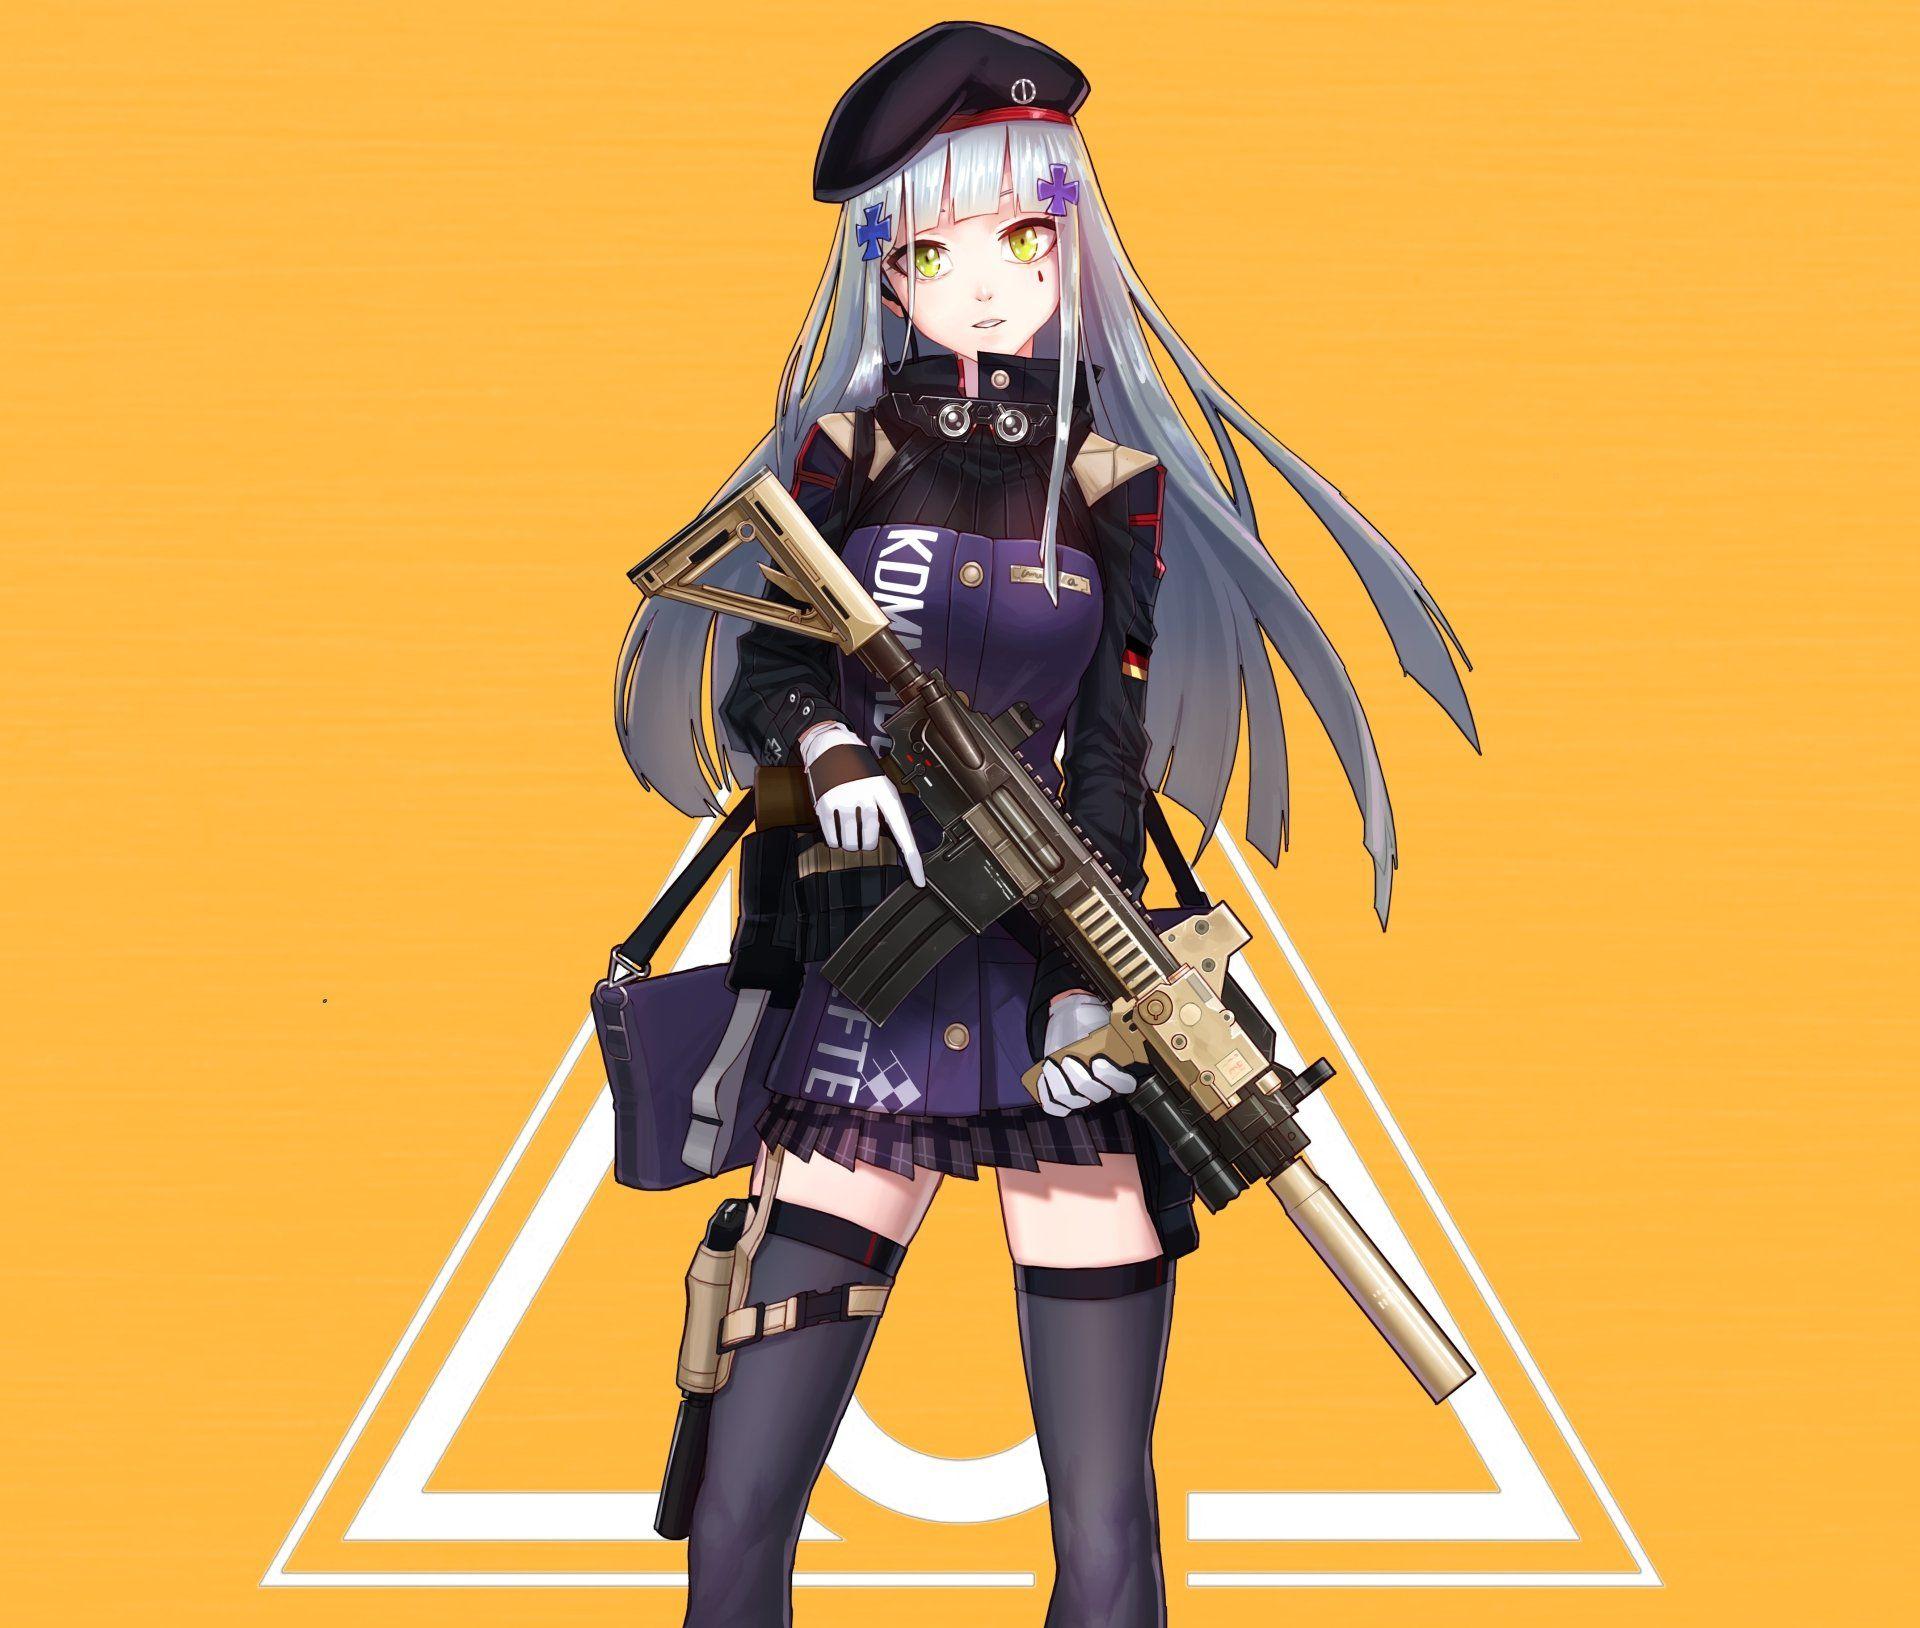 G11 And HK416 Girls Frontline Wallpapers - Wallpaper Cave